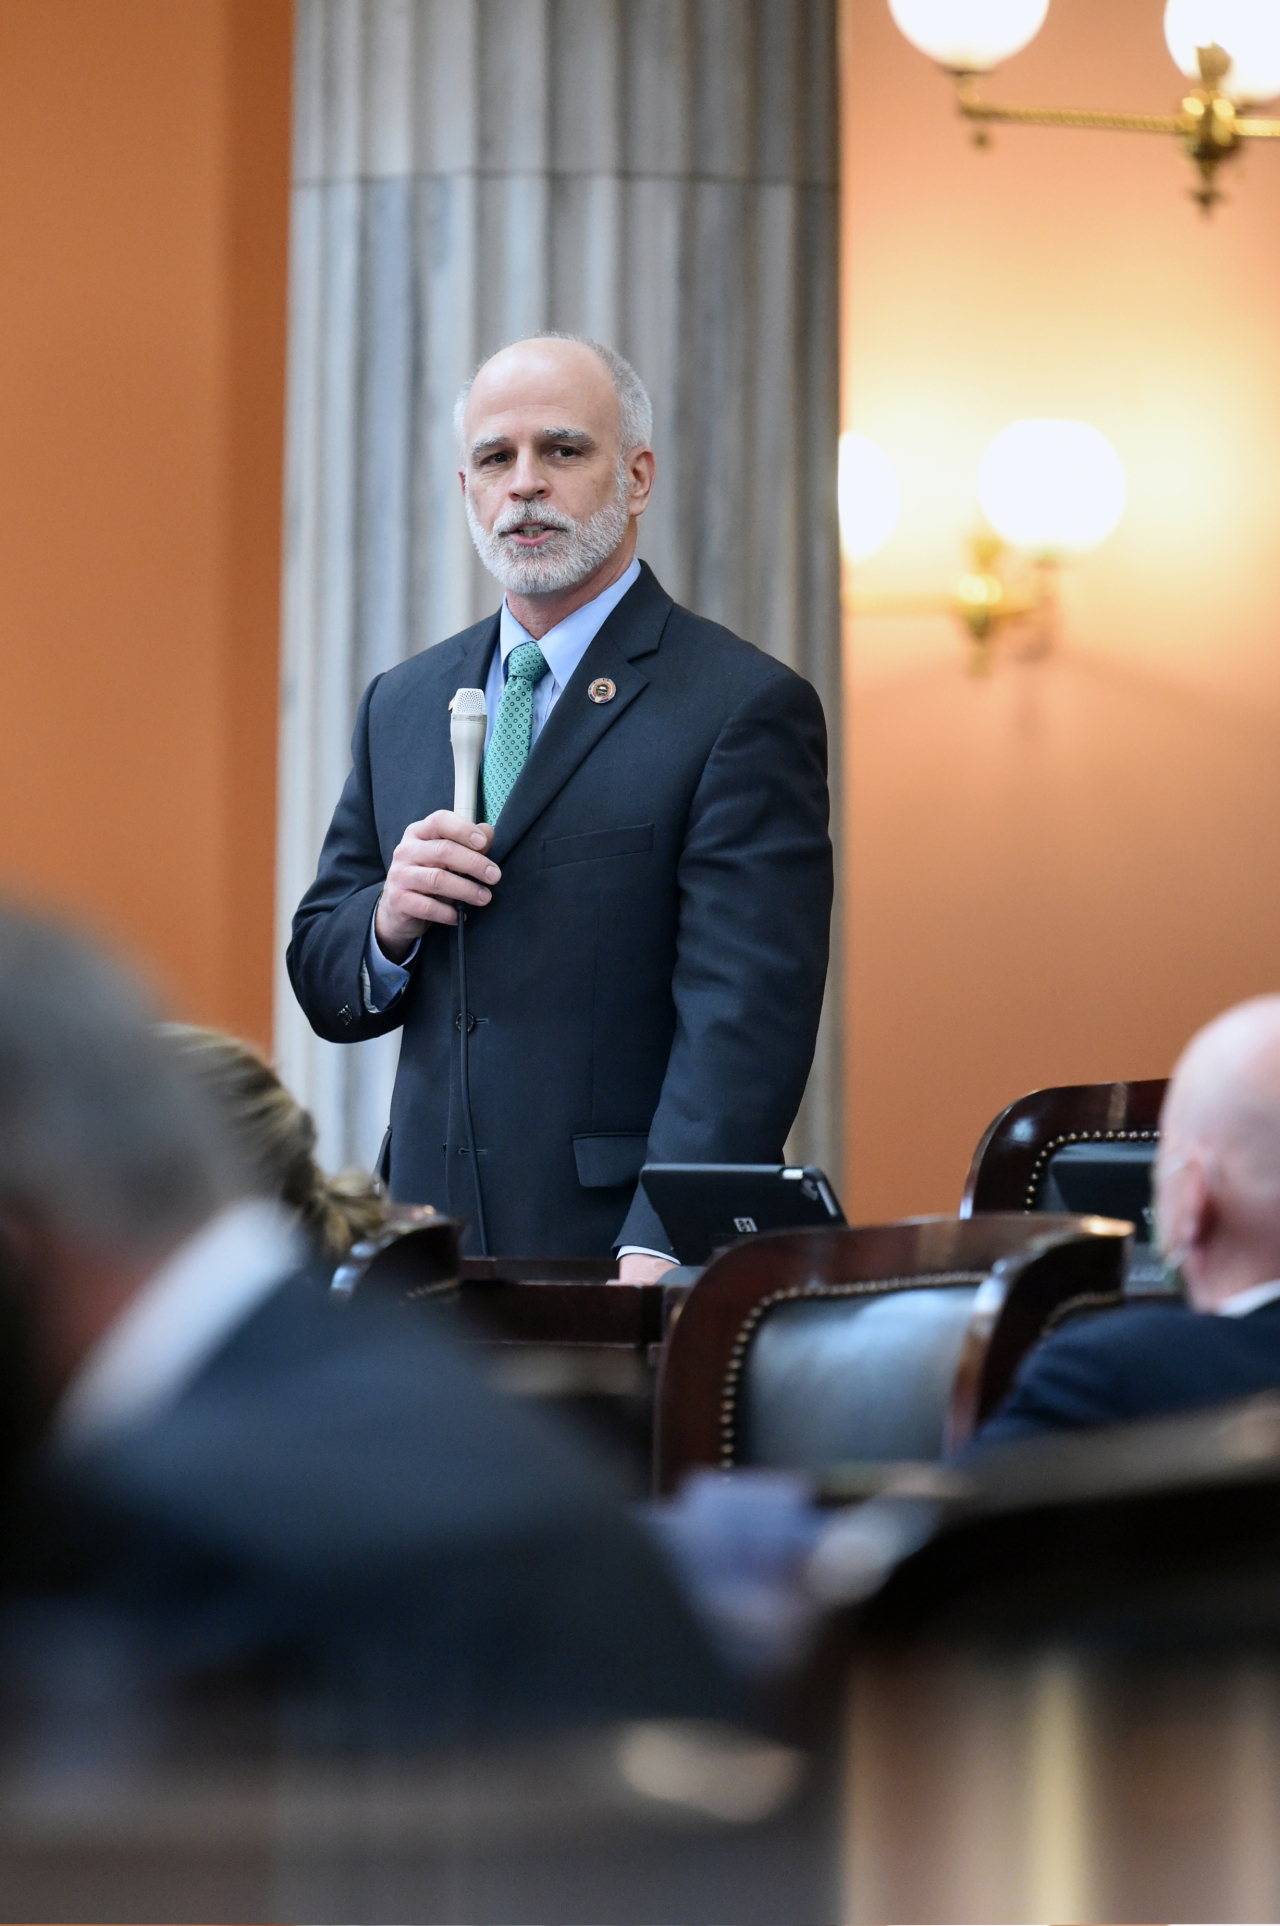 Koehler's Bill to Raise Awareness for Organ Donation Passes the House